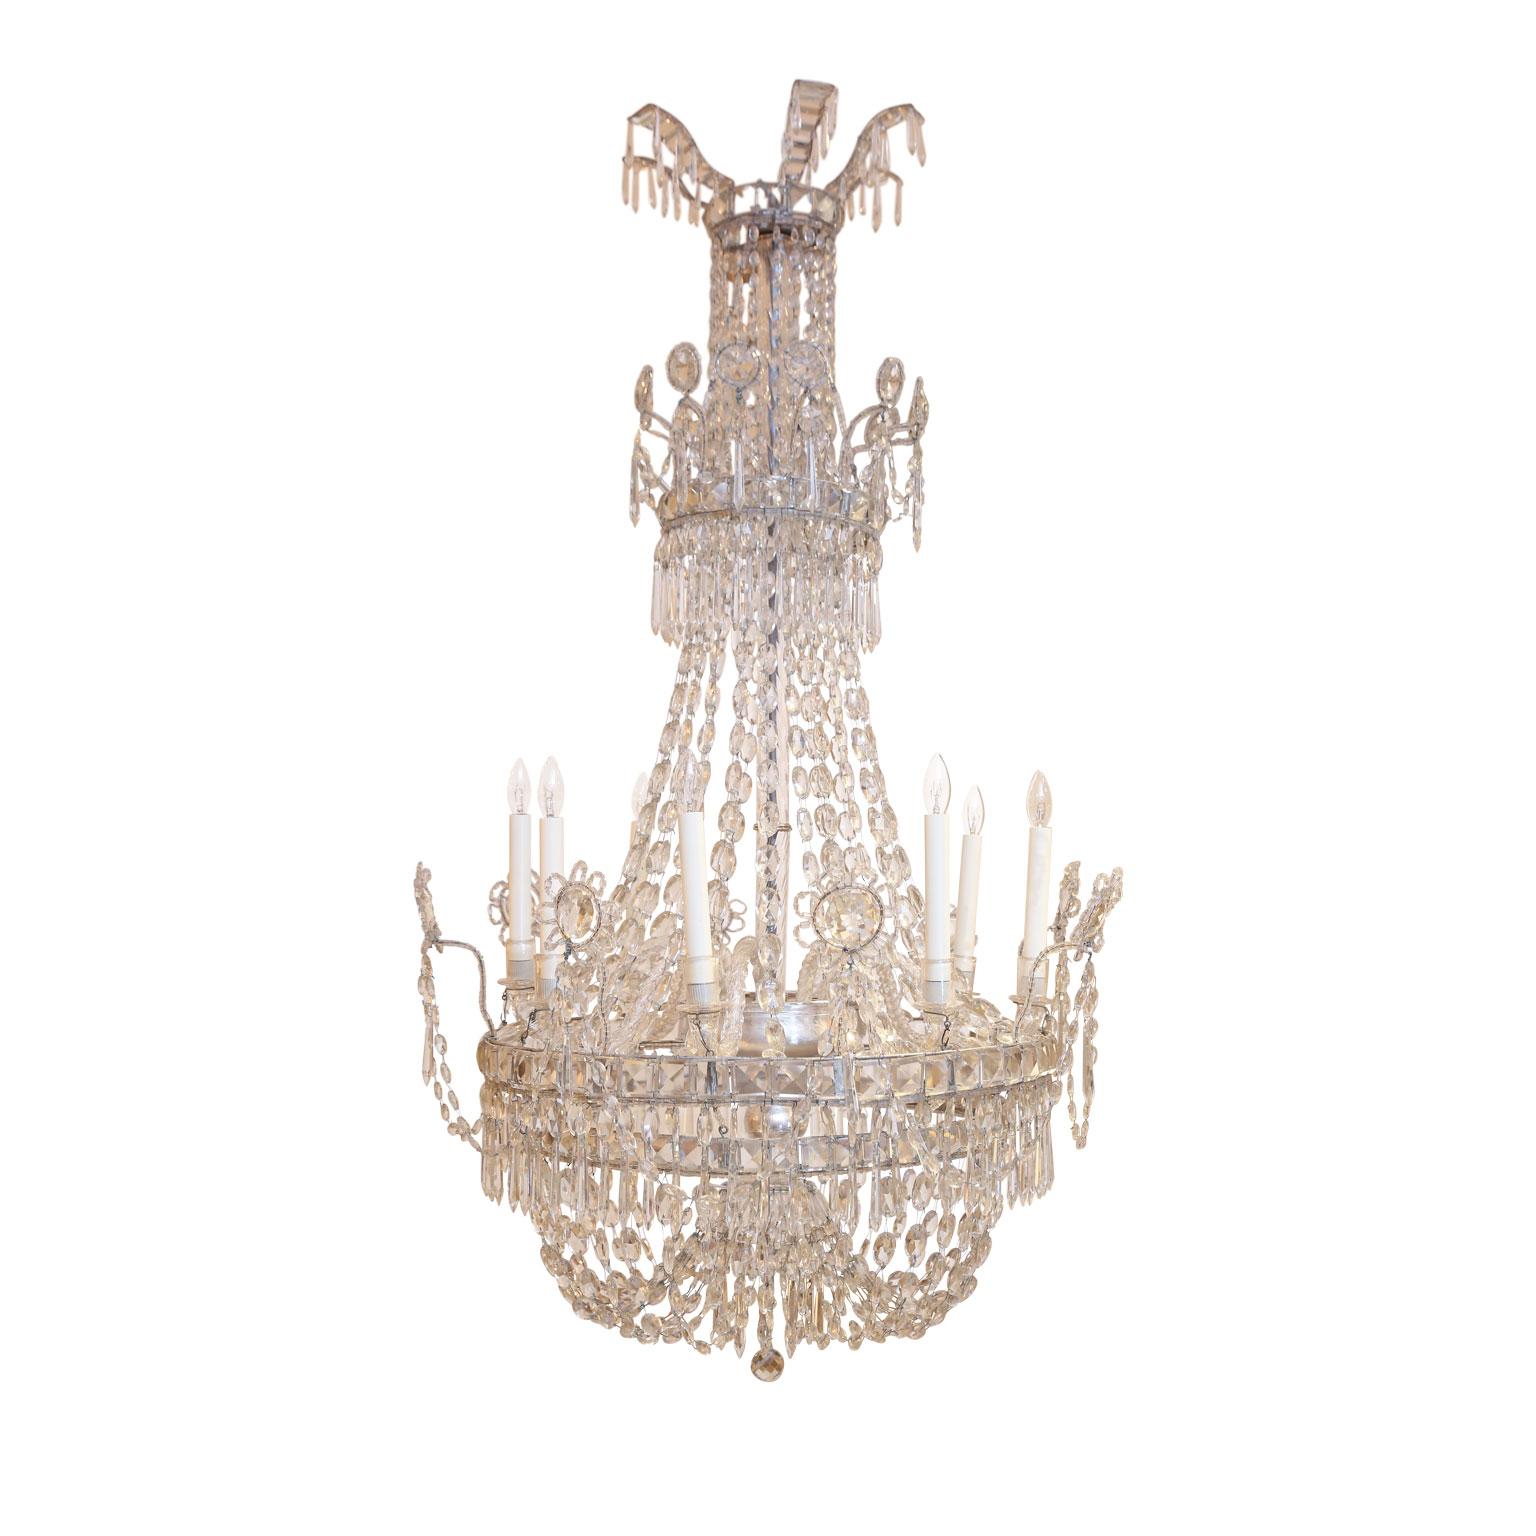 Large eight-light crystal chandelier from Italy, circa 1850-1860. Decorated in crystal prisms, beads and stunning crystal reflectors. Arms are hand blown Murano glass radiating from a glass enclosed silver-gilt metal body. Newly-wired for use within